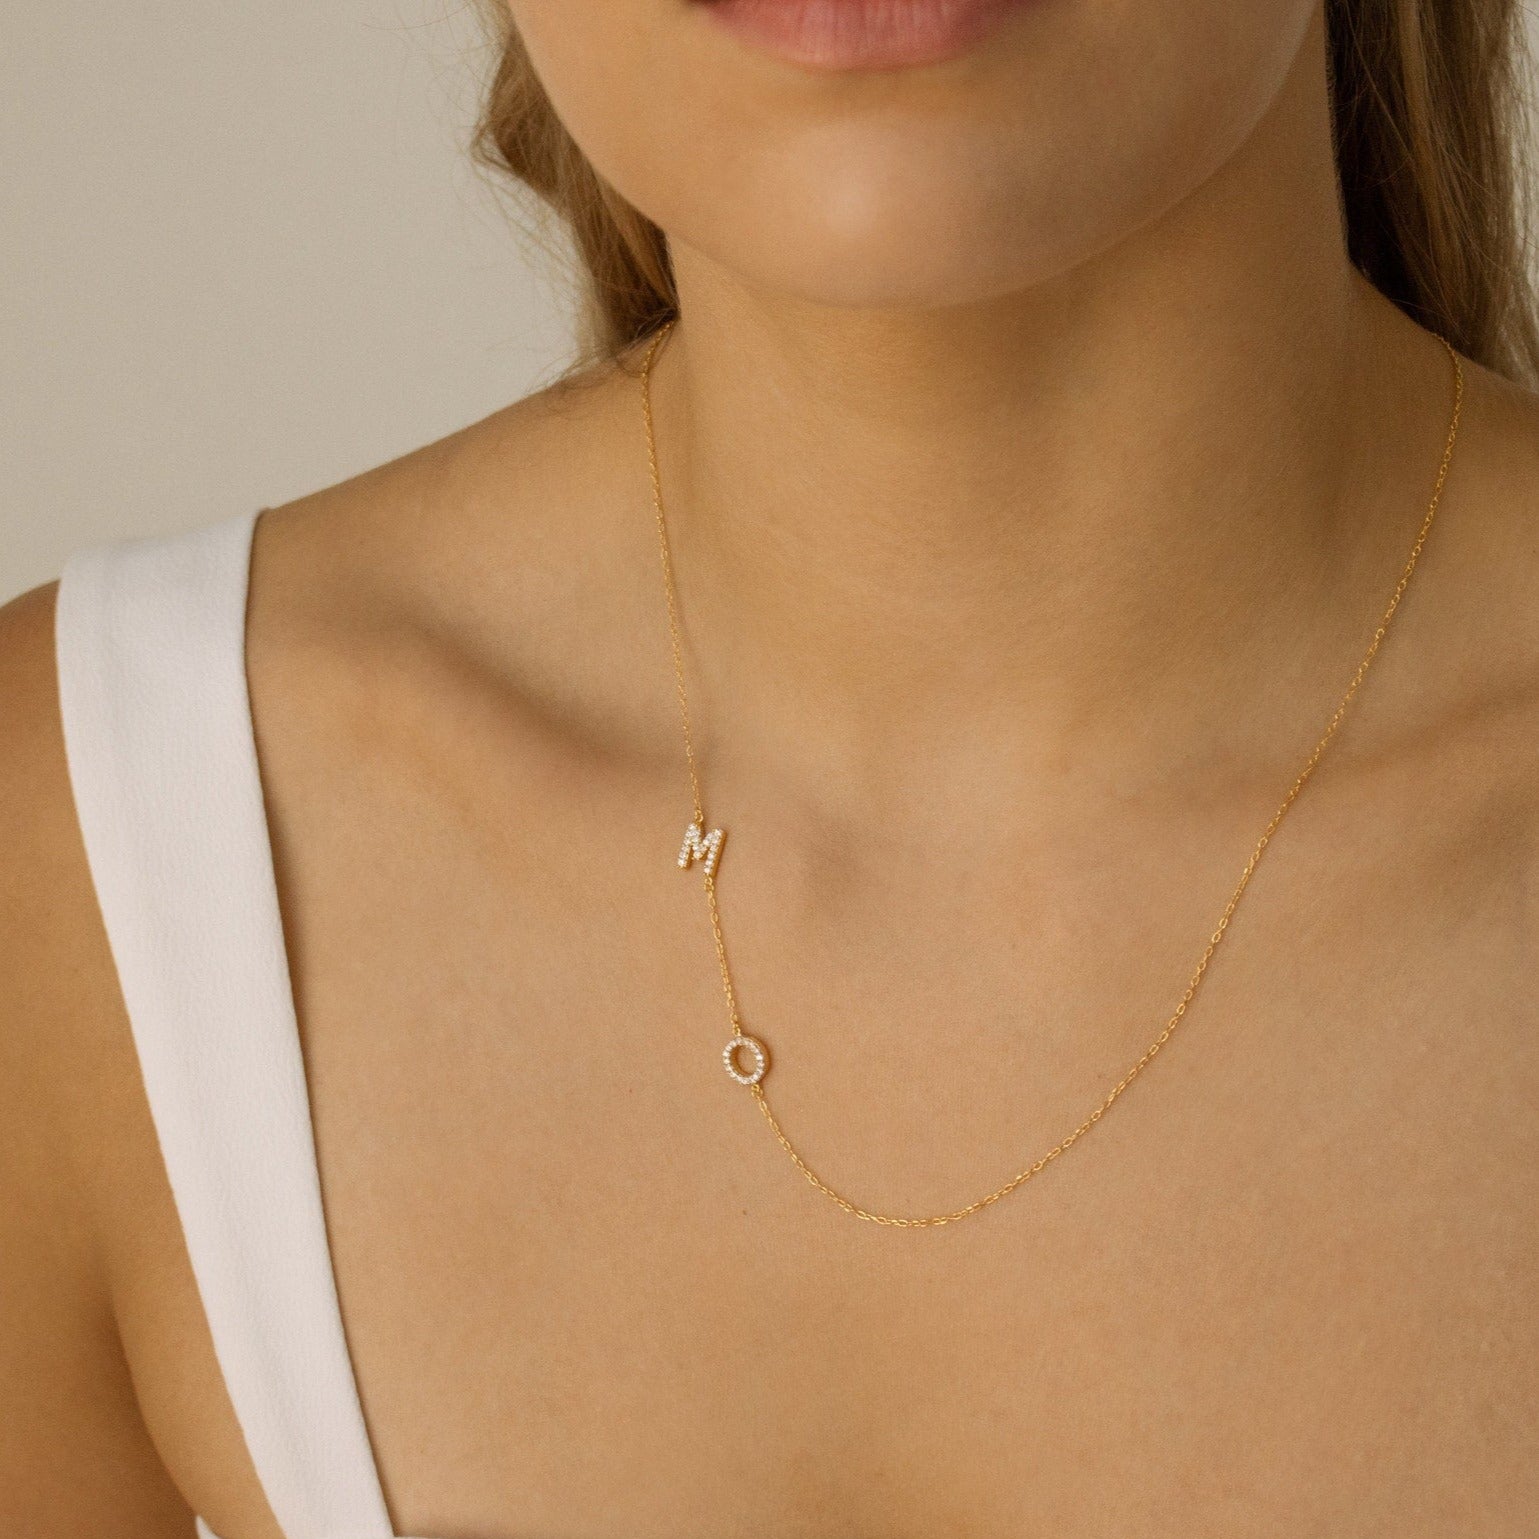 Personalized Sideways Initial Necklace - Lace Chain | Modern Merrigold